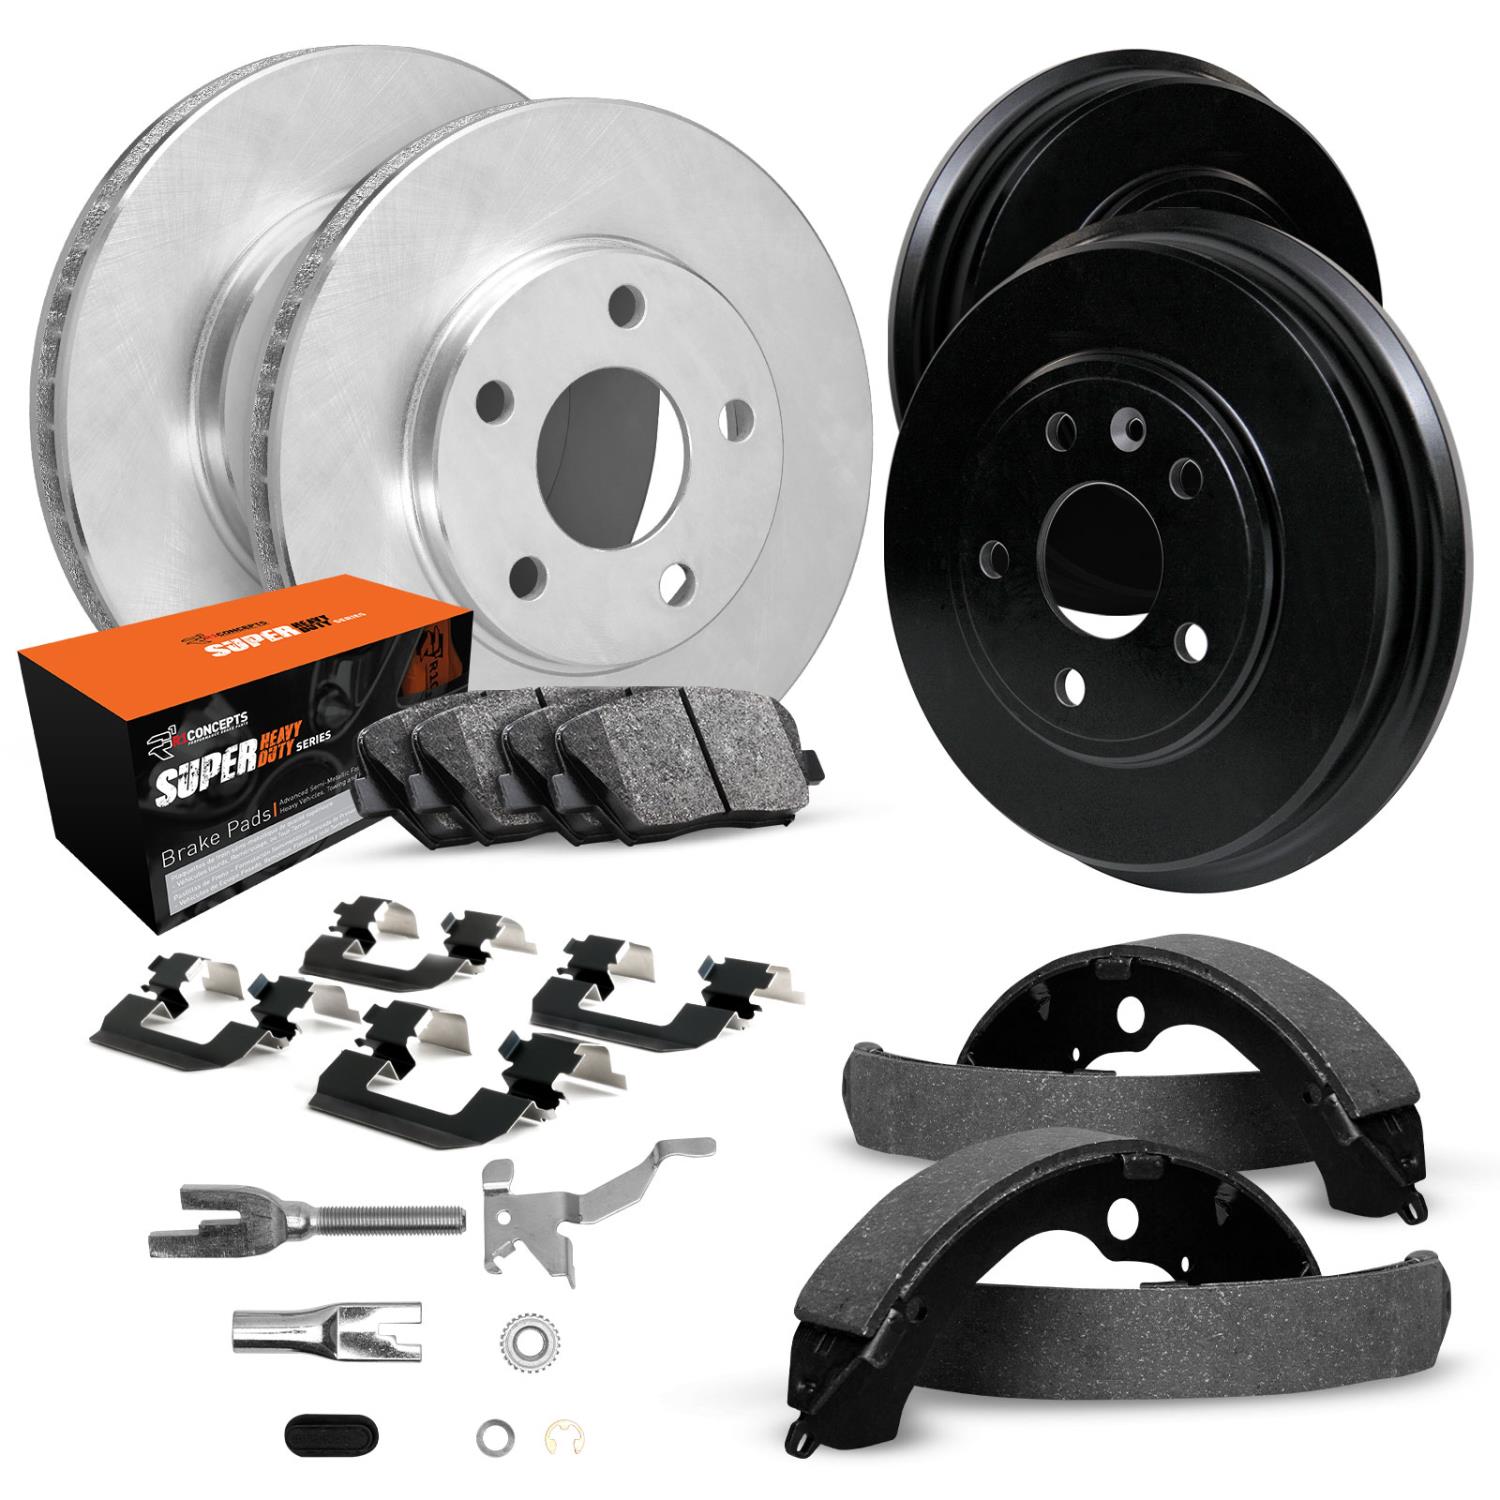 E-Line Blank Brake Rotor & Drum Set w/Super-Duty Pads, Shoes, Hardware, & Adjusters, 1977-1979 Ford/Lincoln/Mercury/Mazda